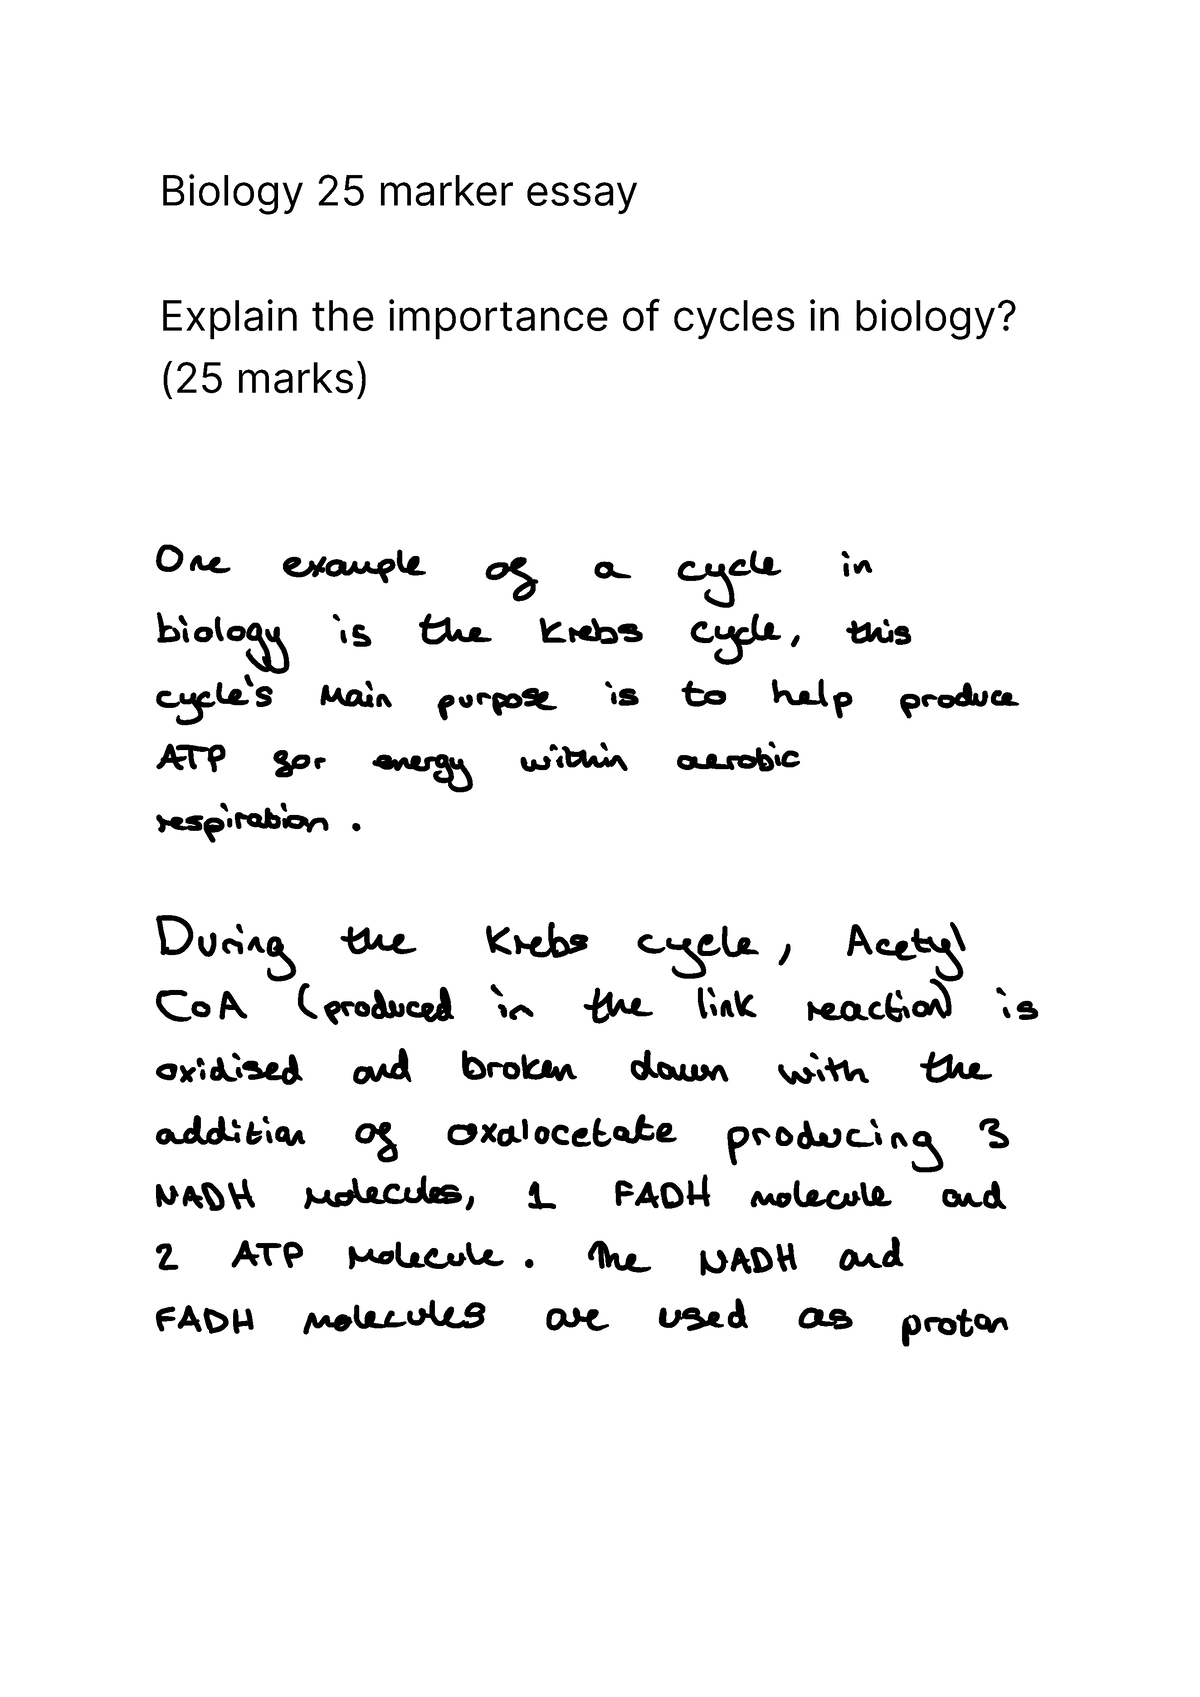 cycles in biology essay plan